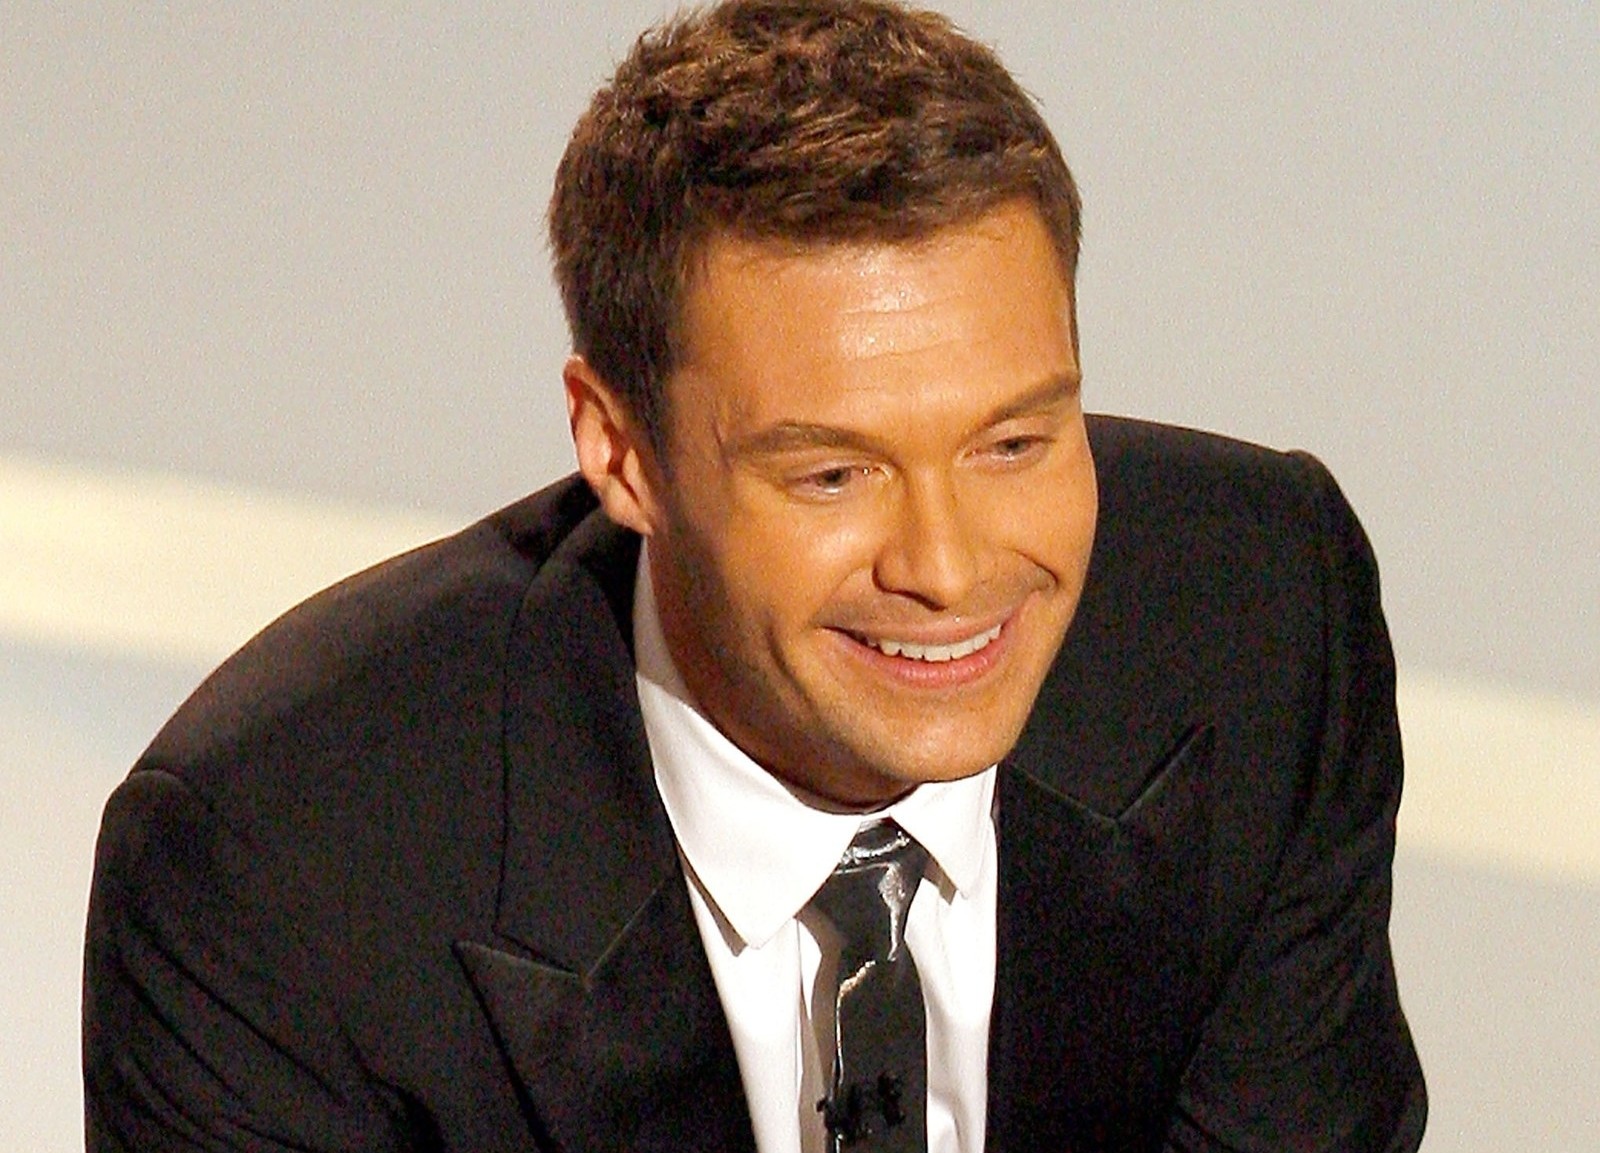 Ryan Seacrest hosted the Emmys in 2007.